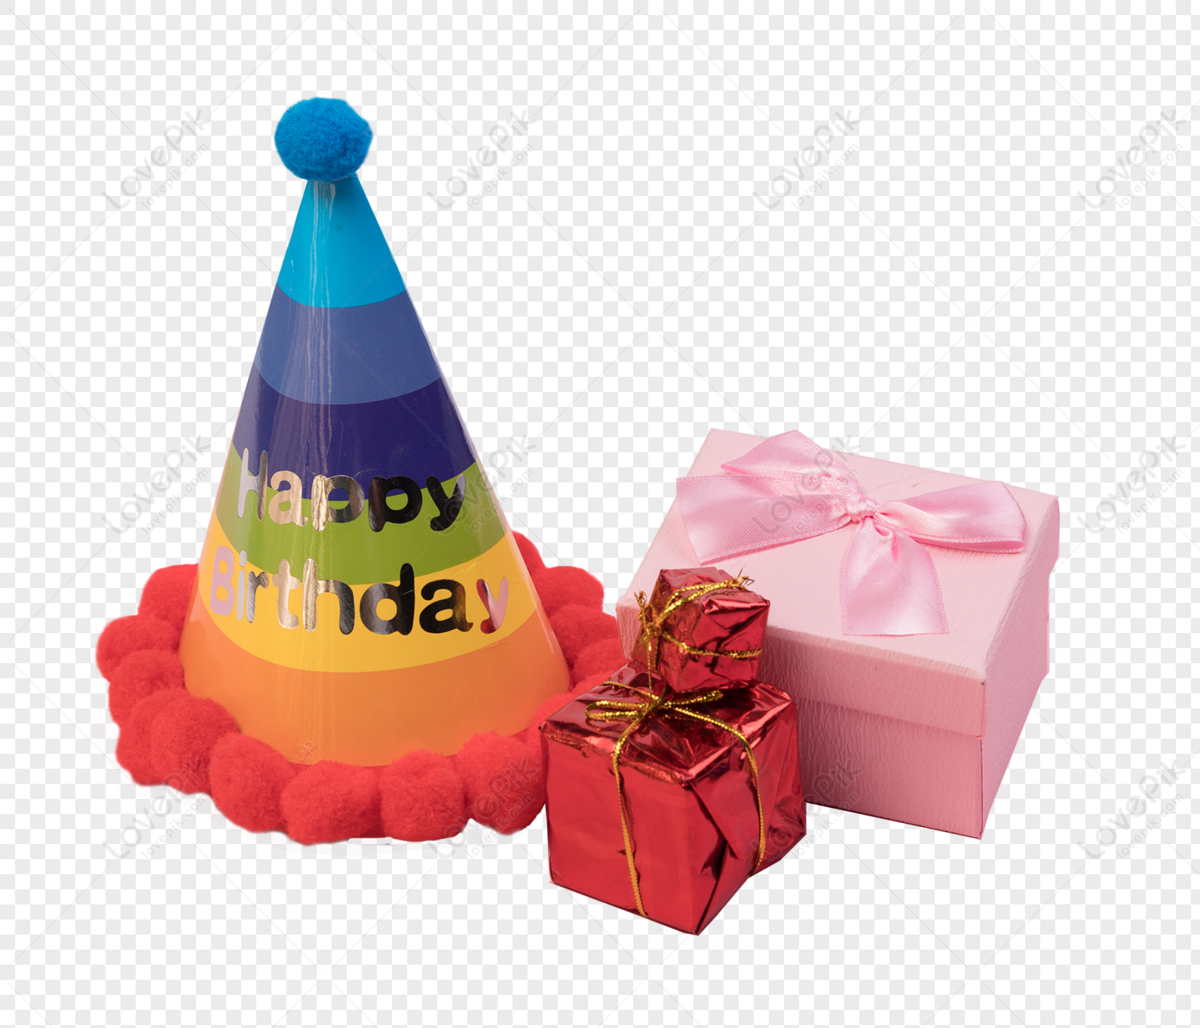 Happy Birthday To You Cake png download - 1796*1655 - Free Transparent  Birthday Cake png Download. - CleanPNG / KissPNG